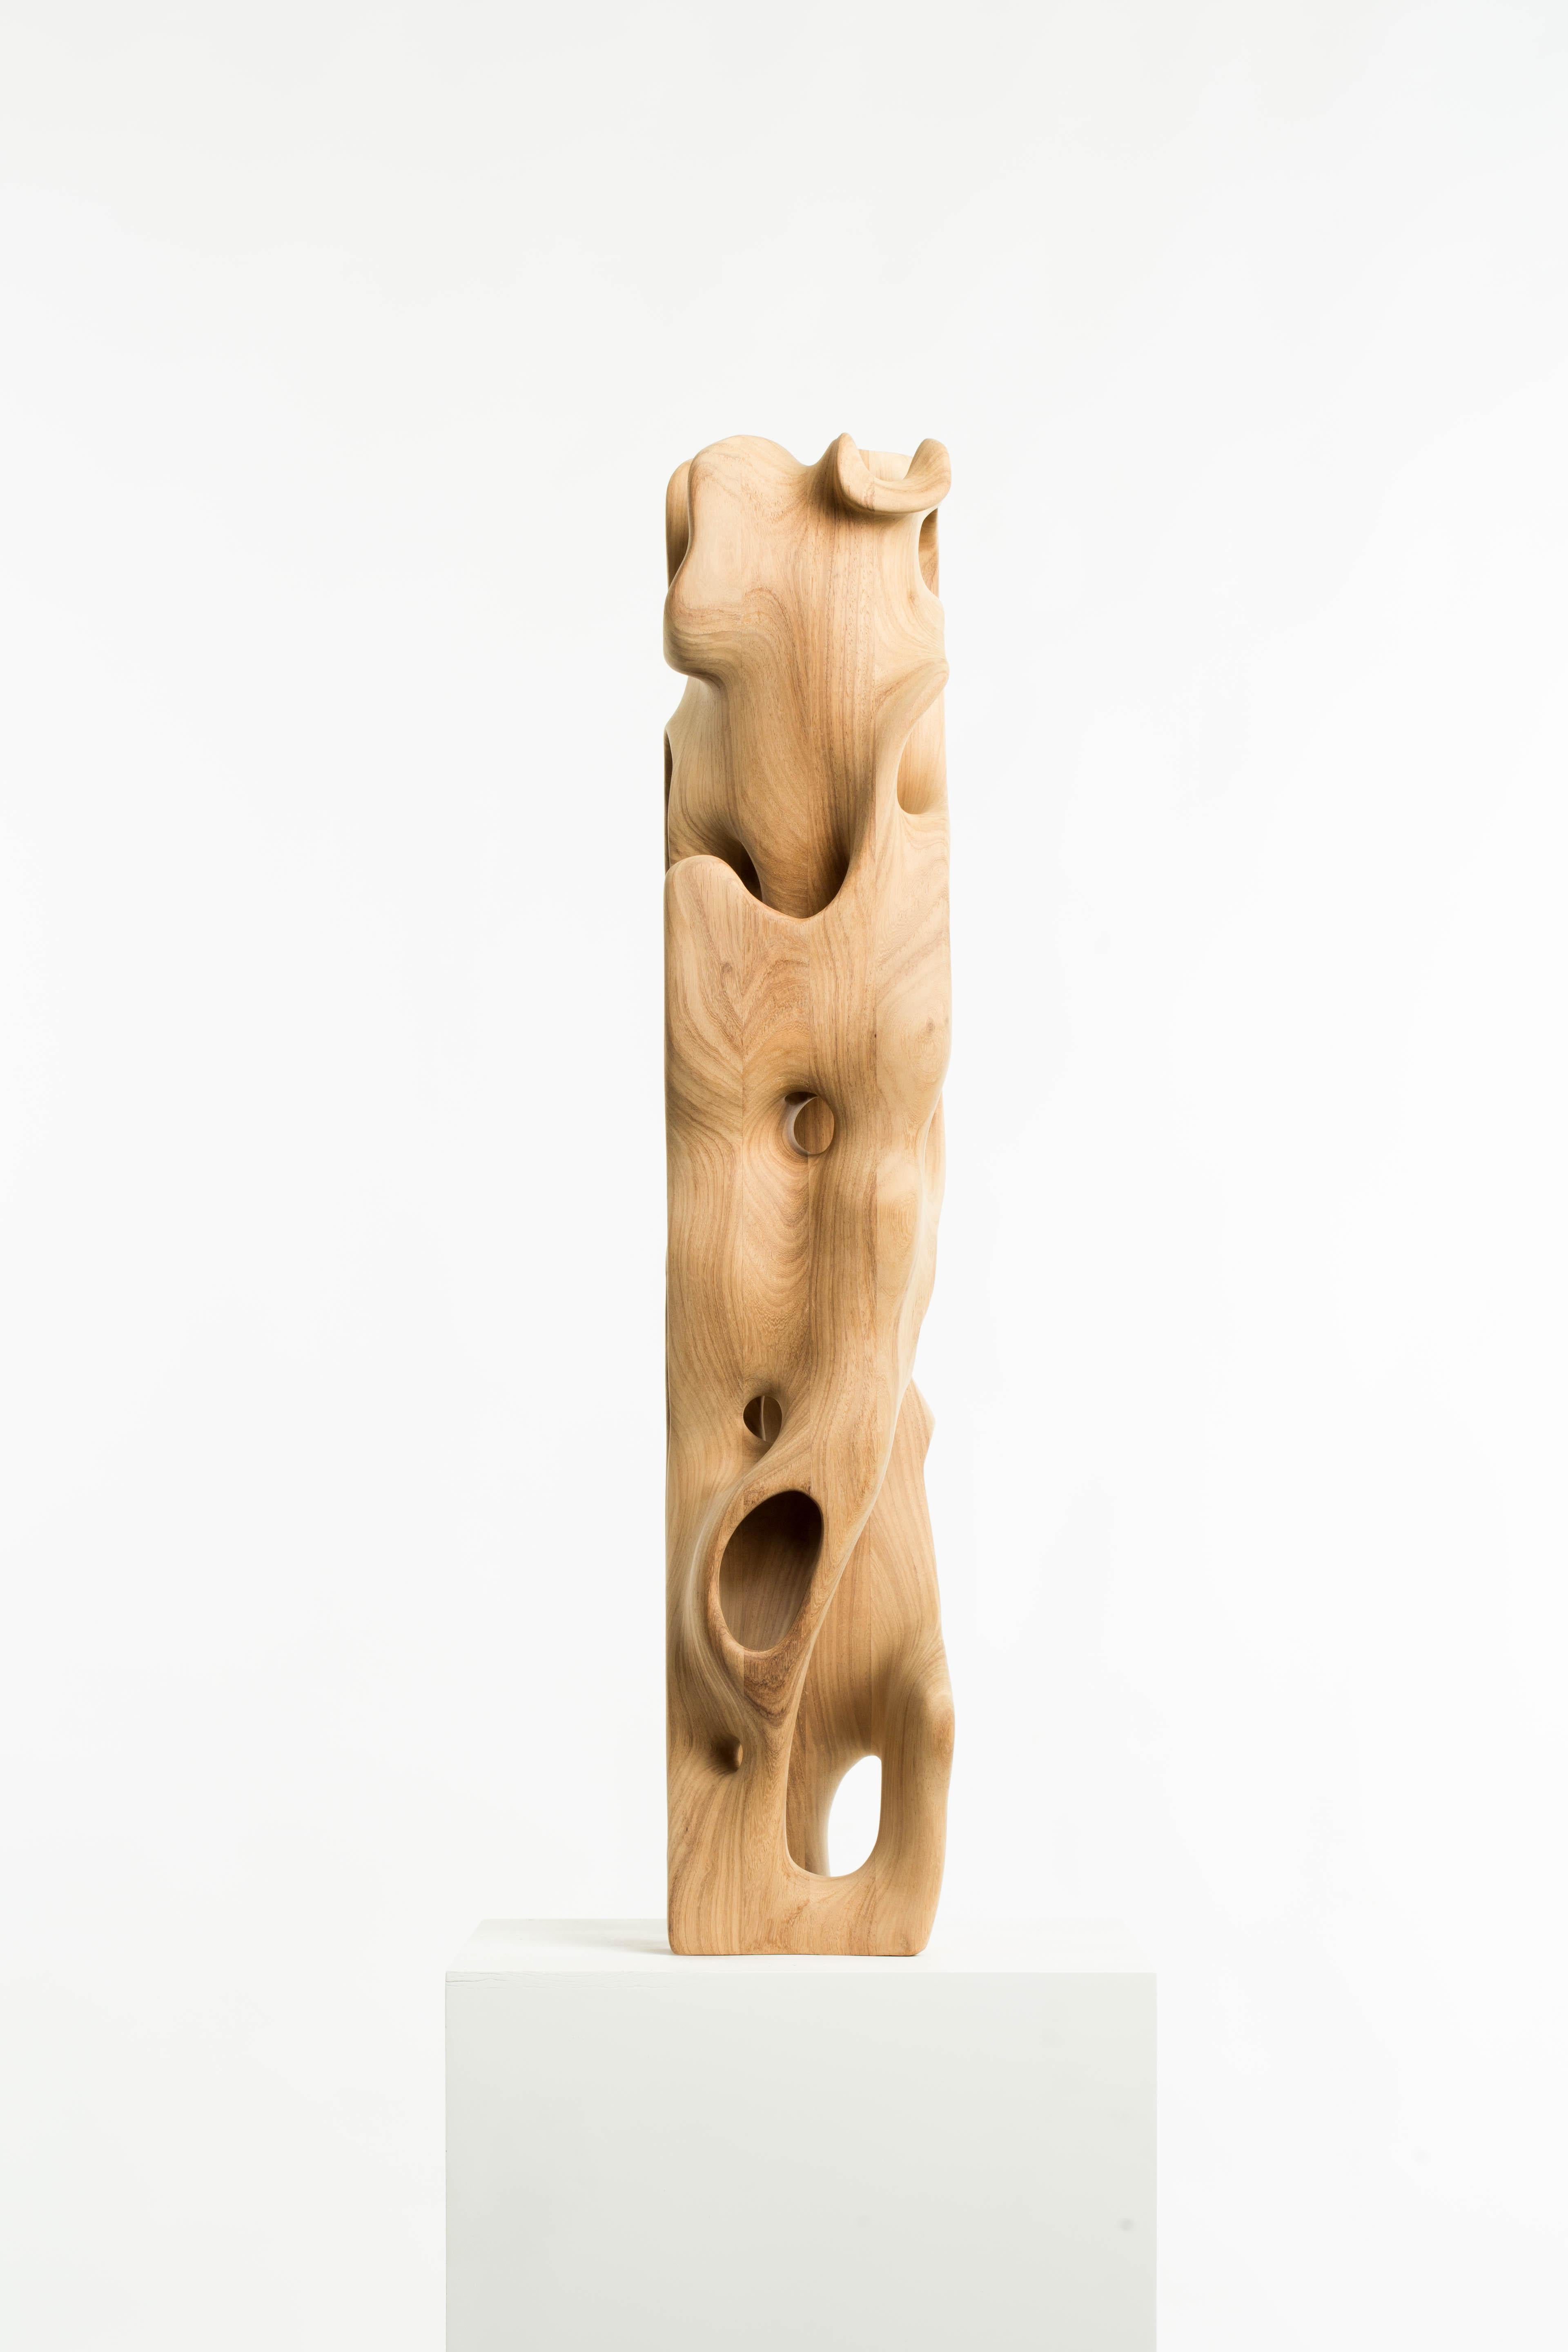 contemporary wood carving